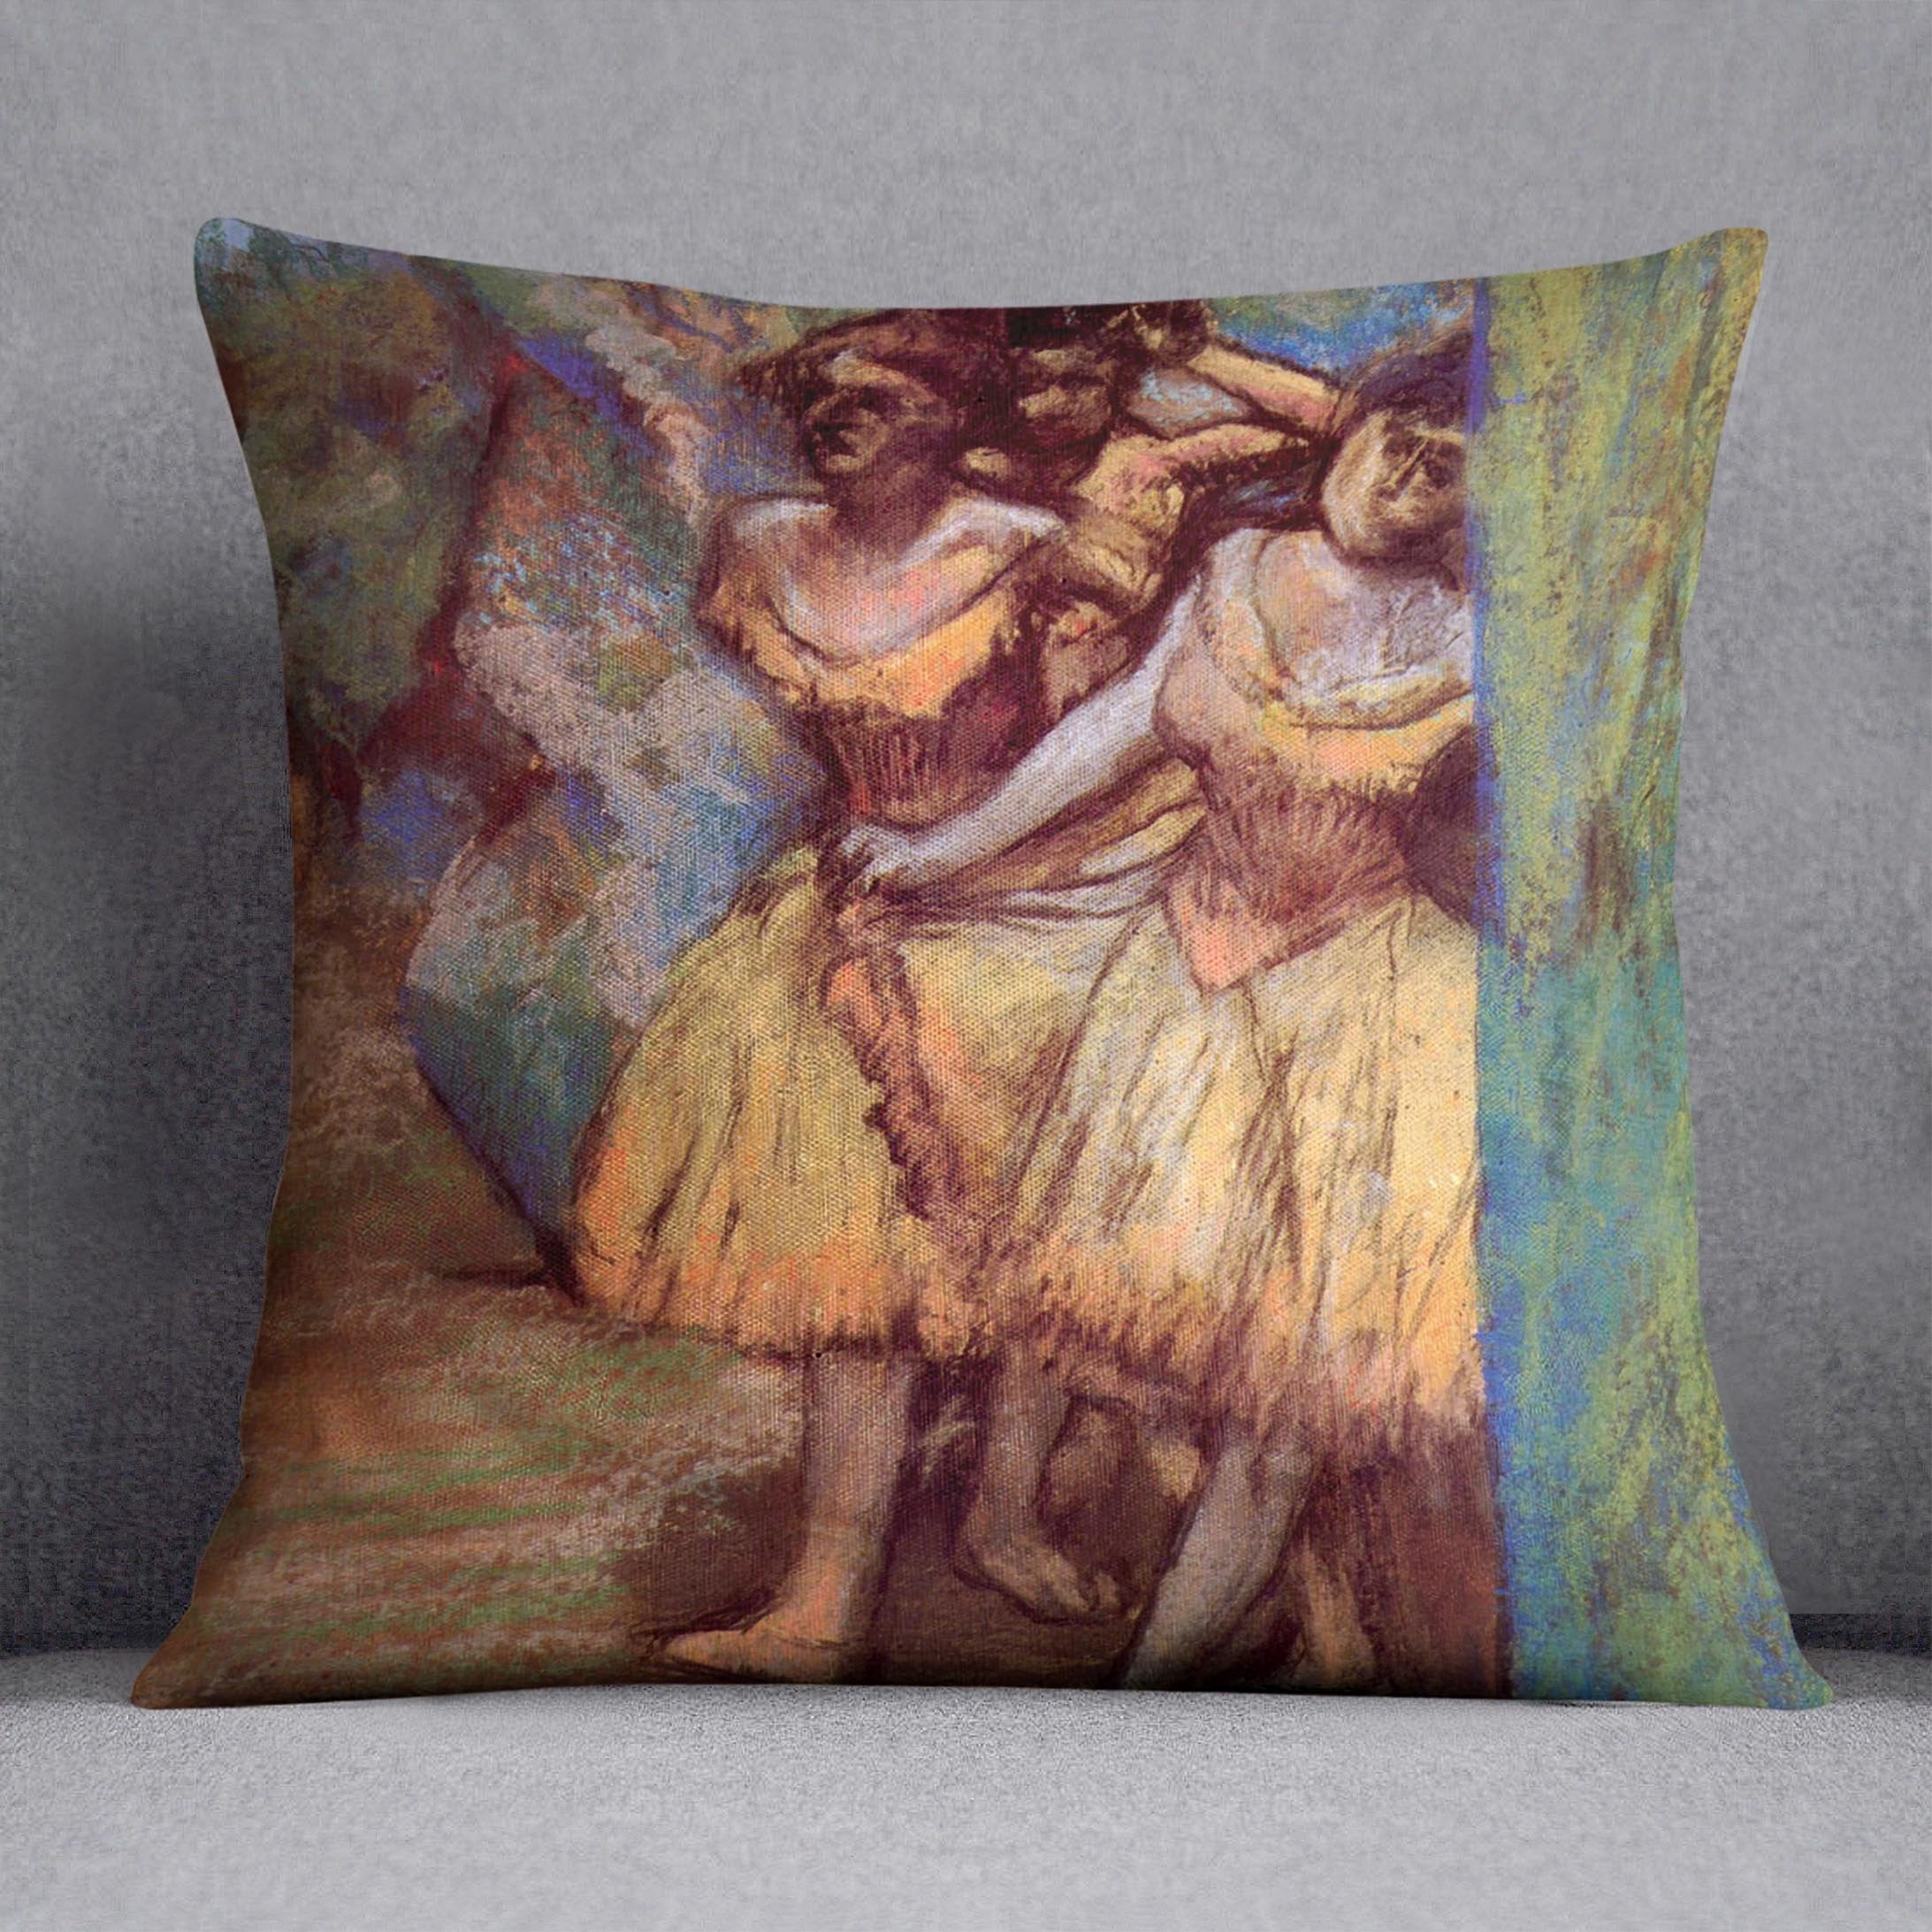 Three dancers behind the scenes by Degas Cushion